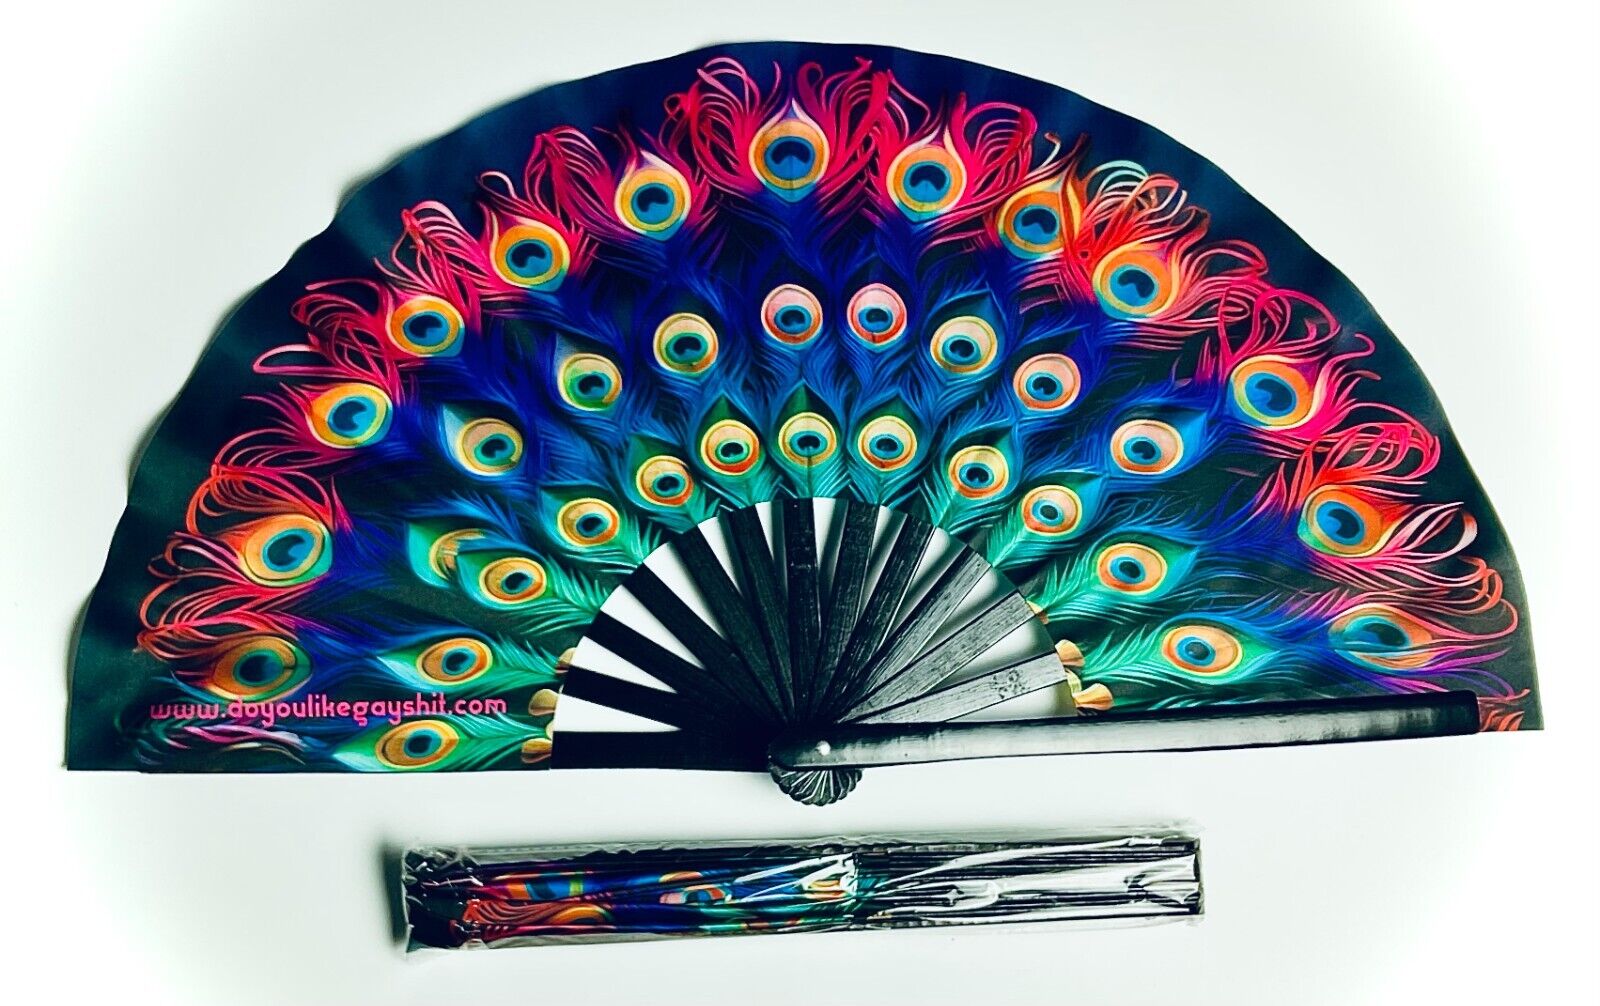 Sexy Rainbow Peacock Feathers 26"  Extra Large Folding Clack Gay Pride Fan Rave Do You Like Gay Shit?